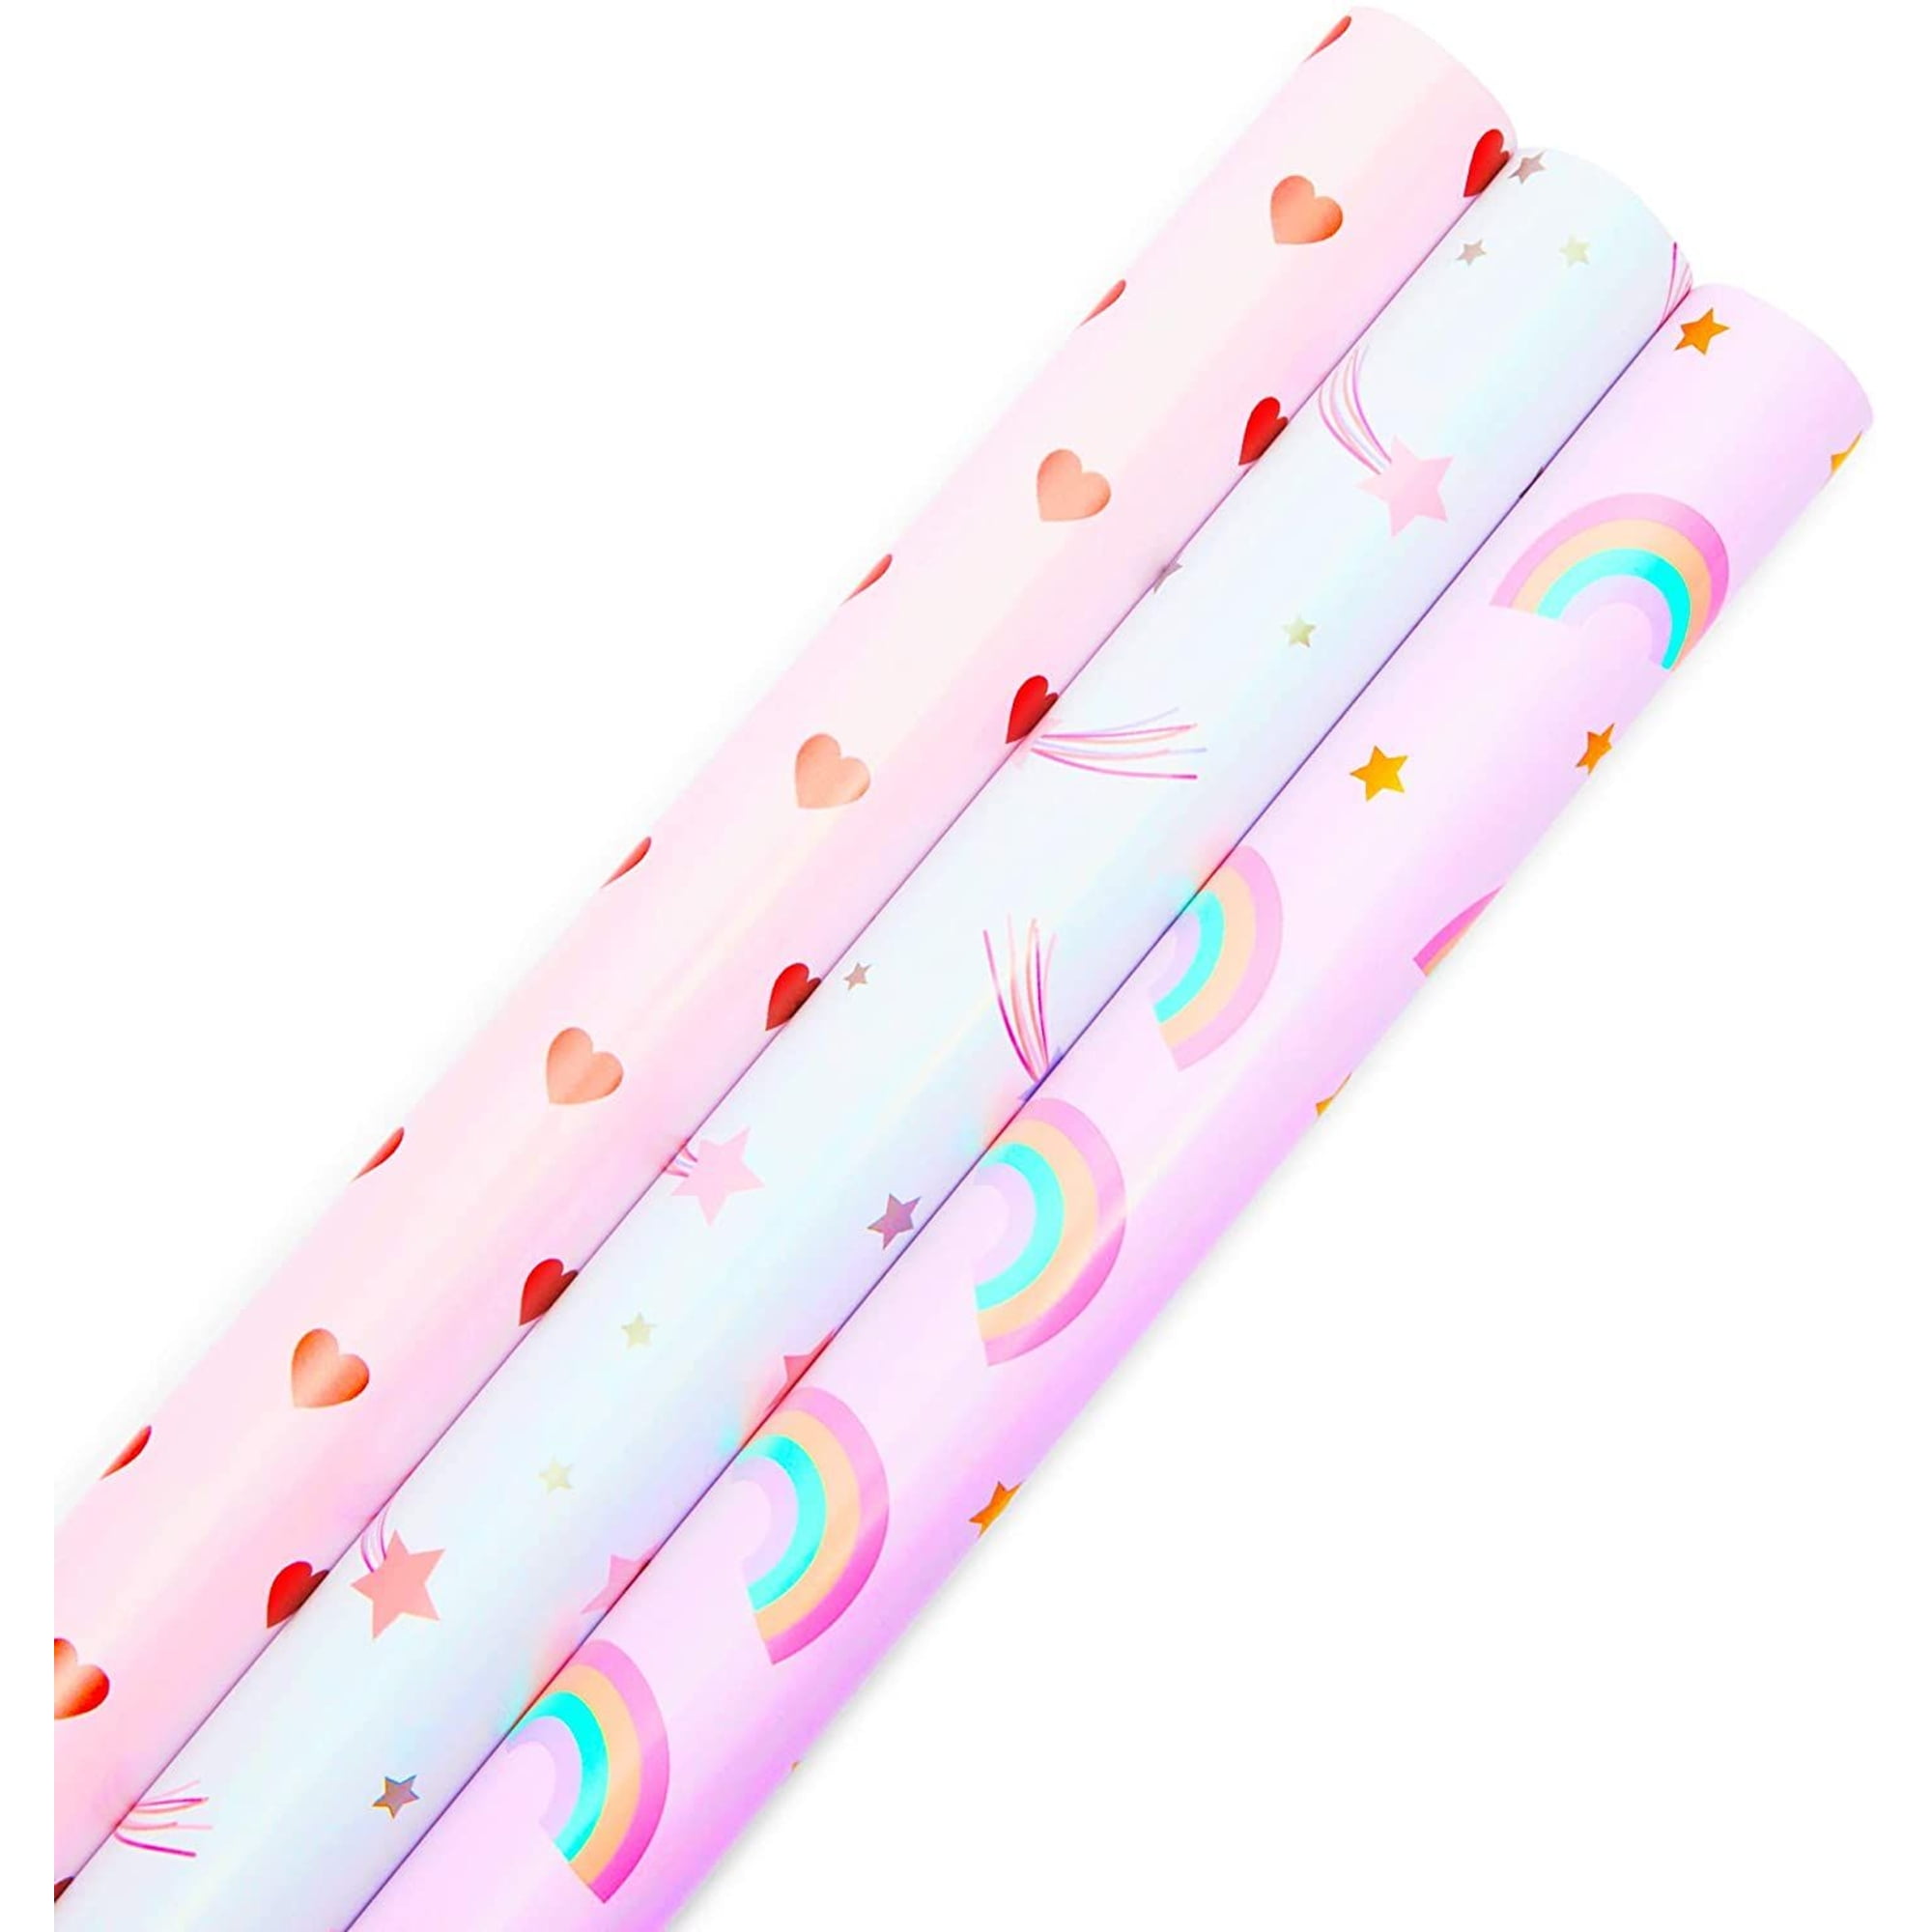 susiyo Wrapping Paper, 3 Rolls Pink Paw Prints Cat Paw Gift Wrap, 58 x 22.8  inch Per Roll